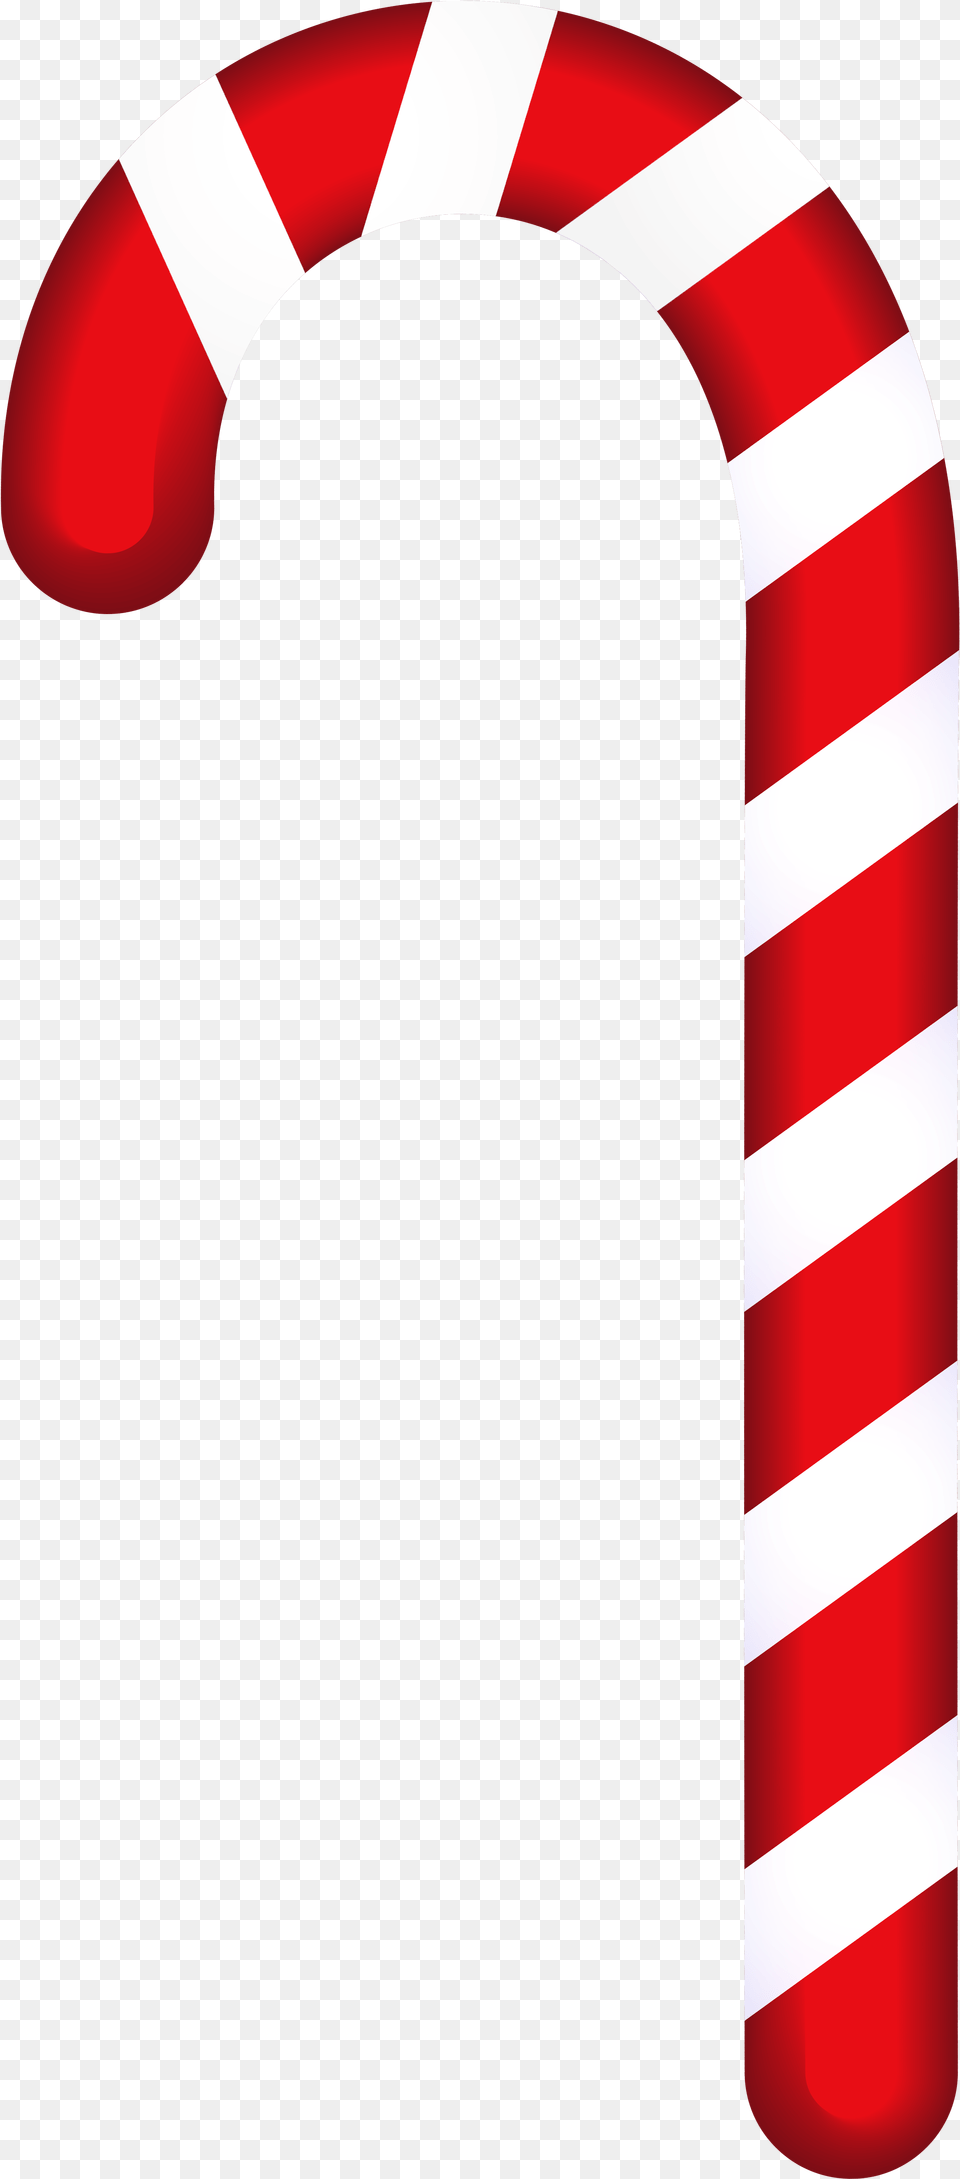 Candy Cane Scraps On Candy Canes Vintage Christmas Candy Cane Clipart, Stick, Food, Sweets, Dynamite Png